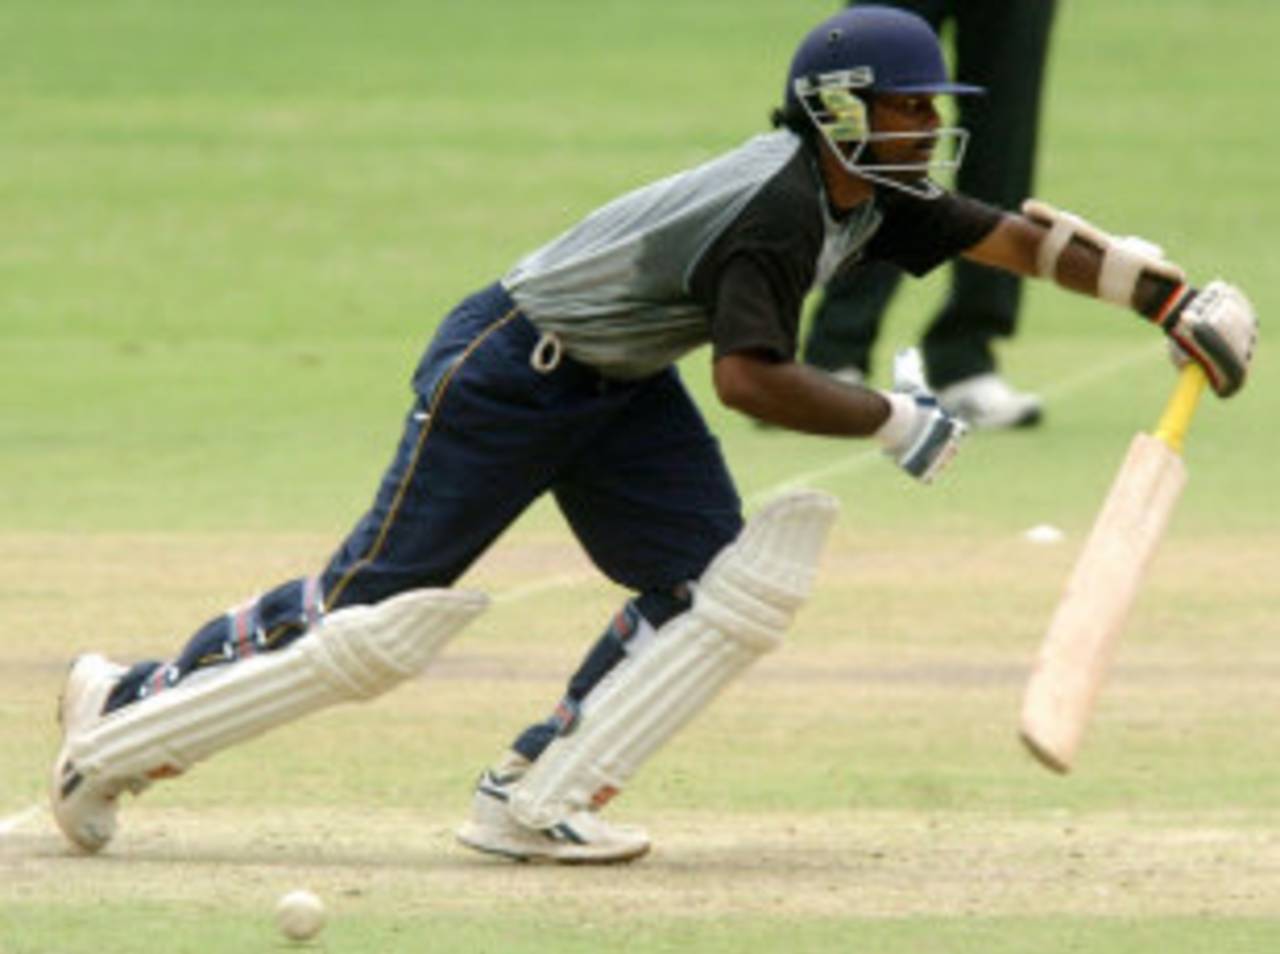 Venugopal Rao at a practice session in Bangalore, July 19, 2005